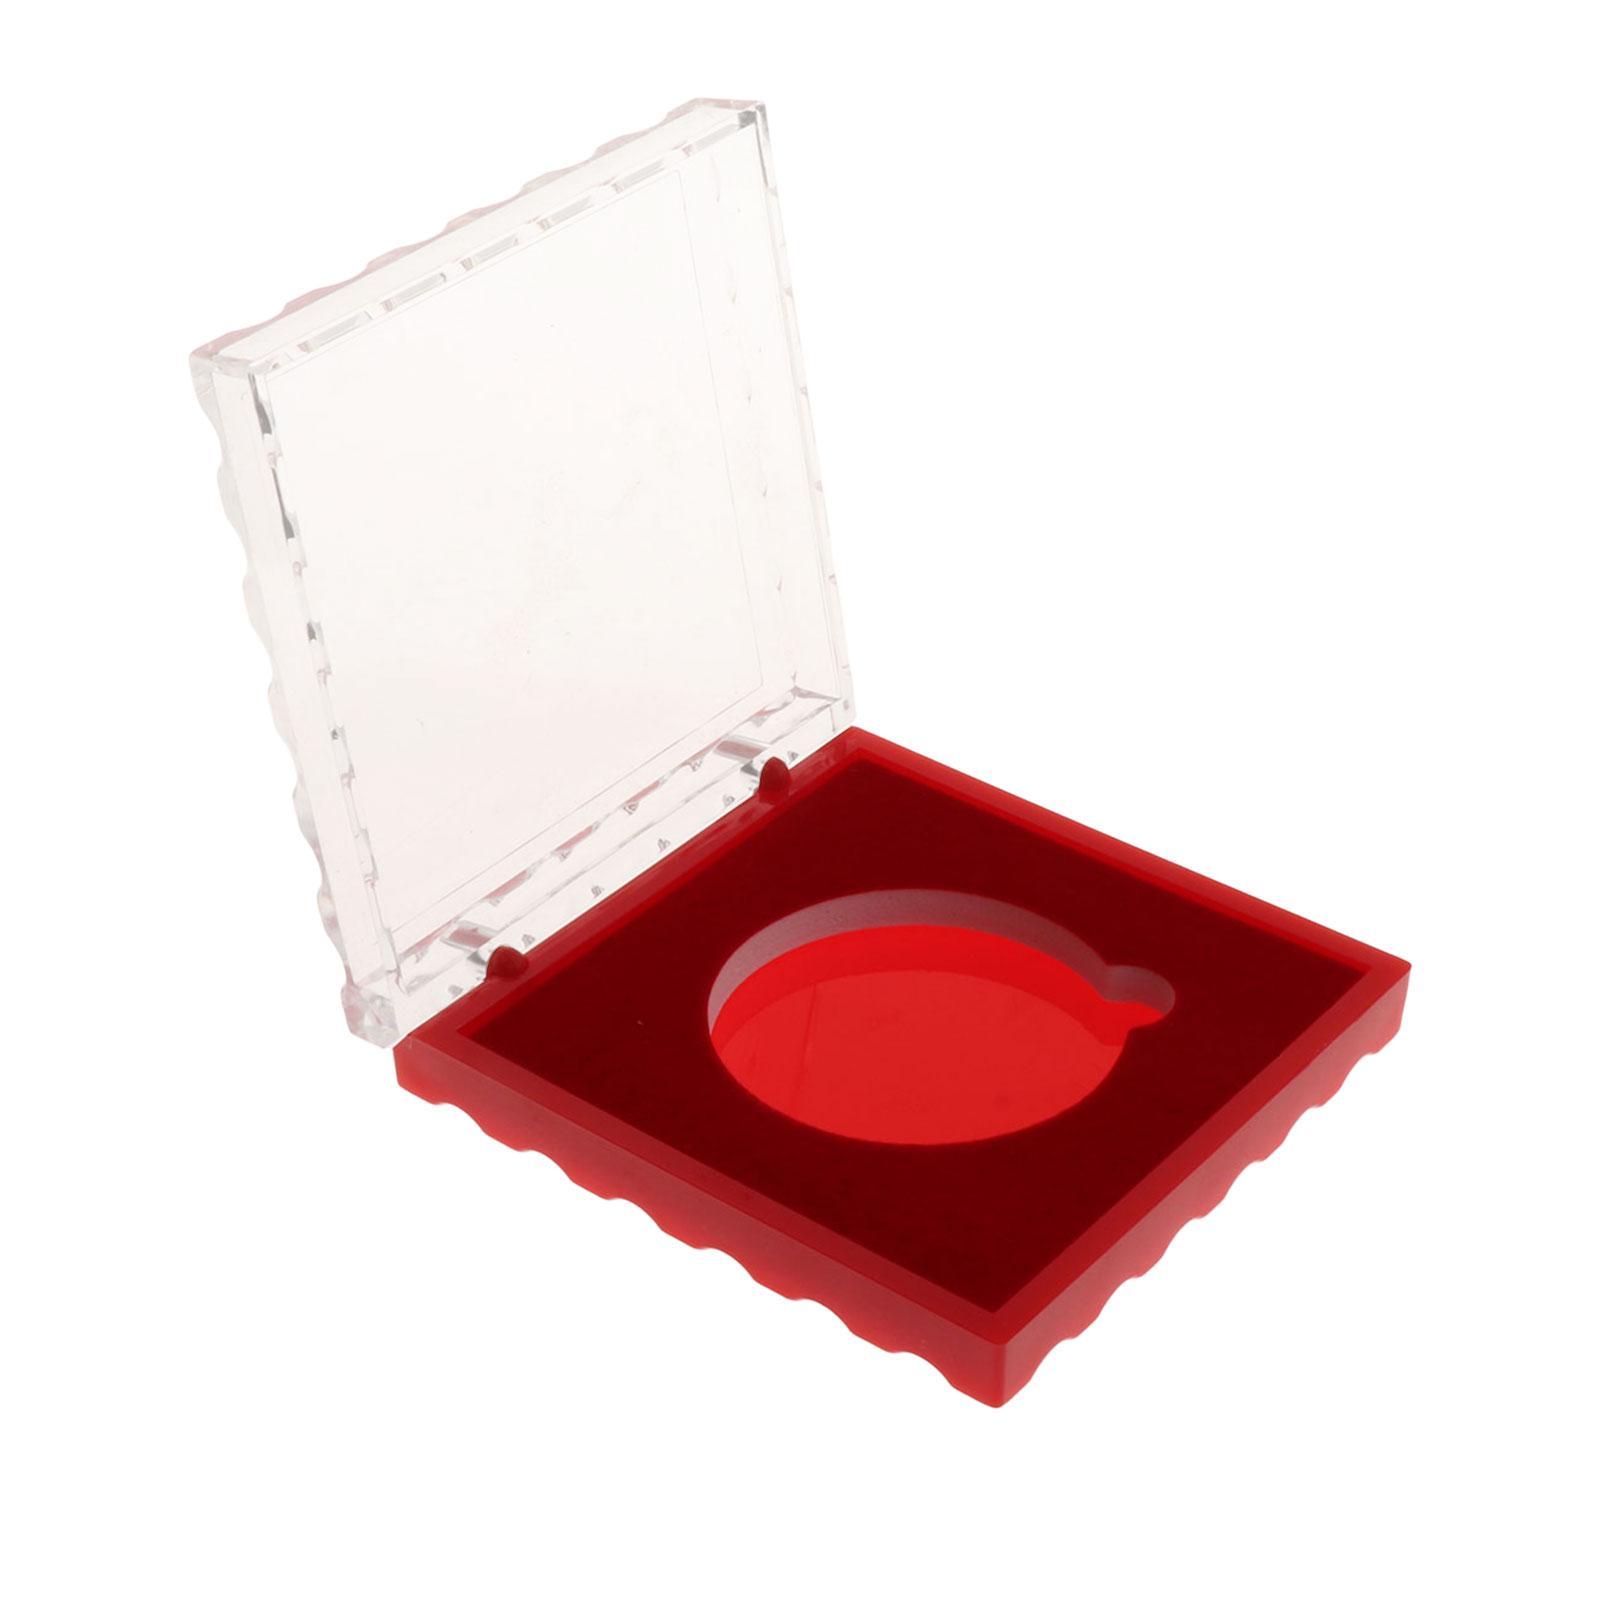 Display Box Durable Storage Box Collections Box for Jewelry Collectors Gifts